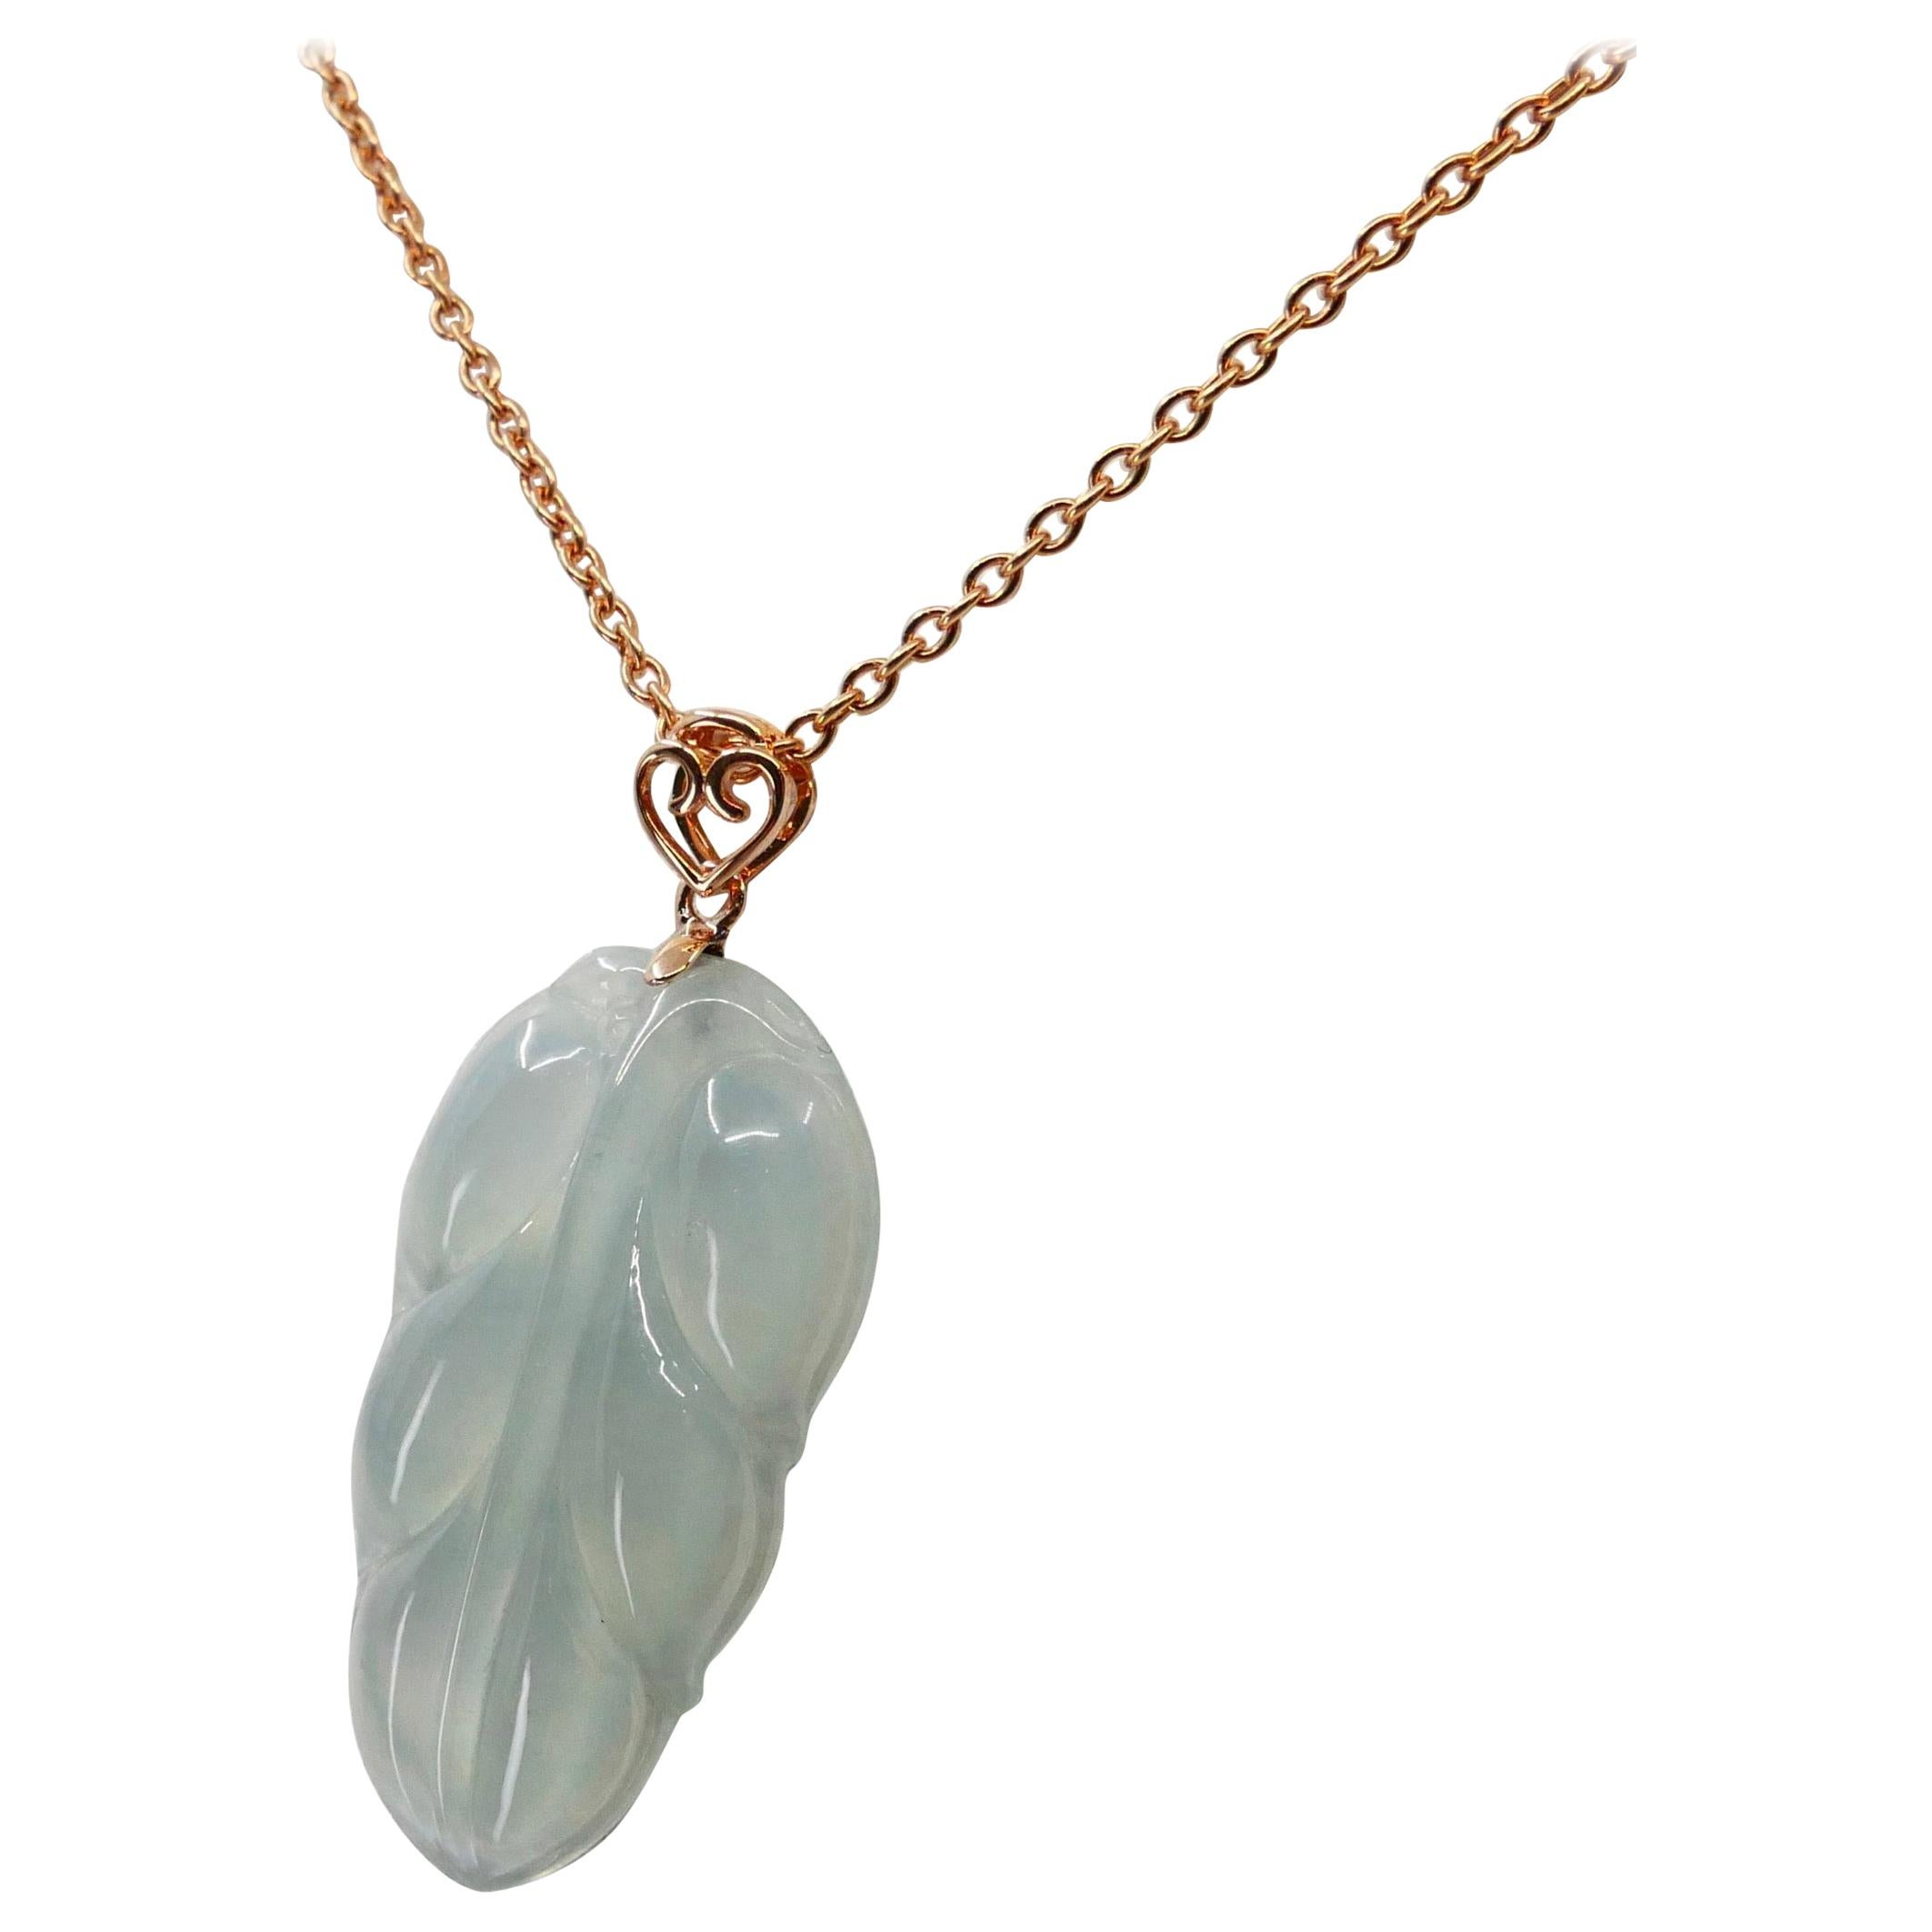 Certified 18.32 Carat Icy Jadeite Jade Leaf Pendant Necklace, Good Fortune  For Sale at 1stDibs